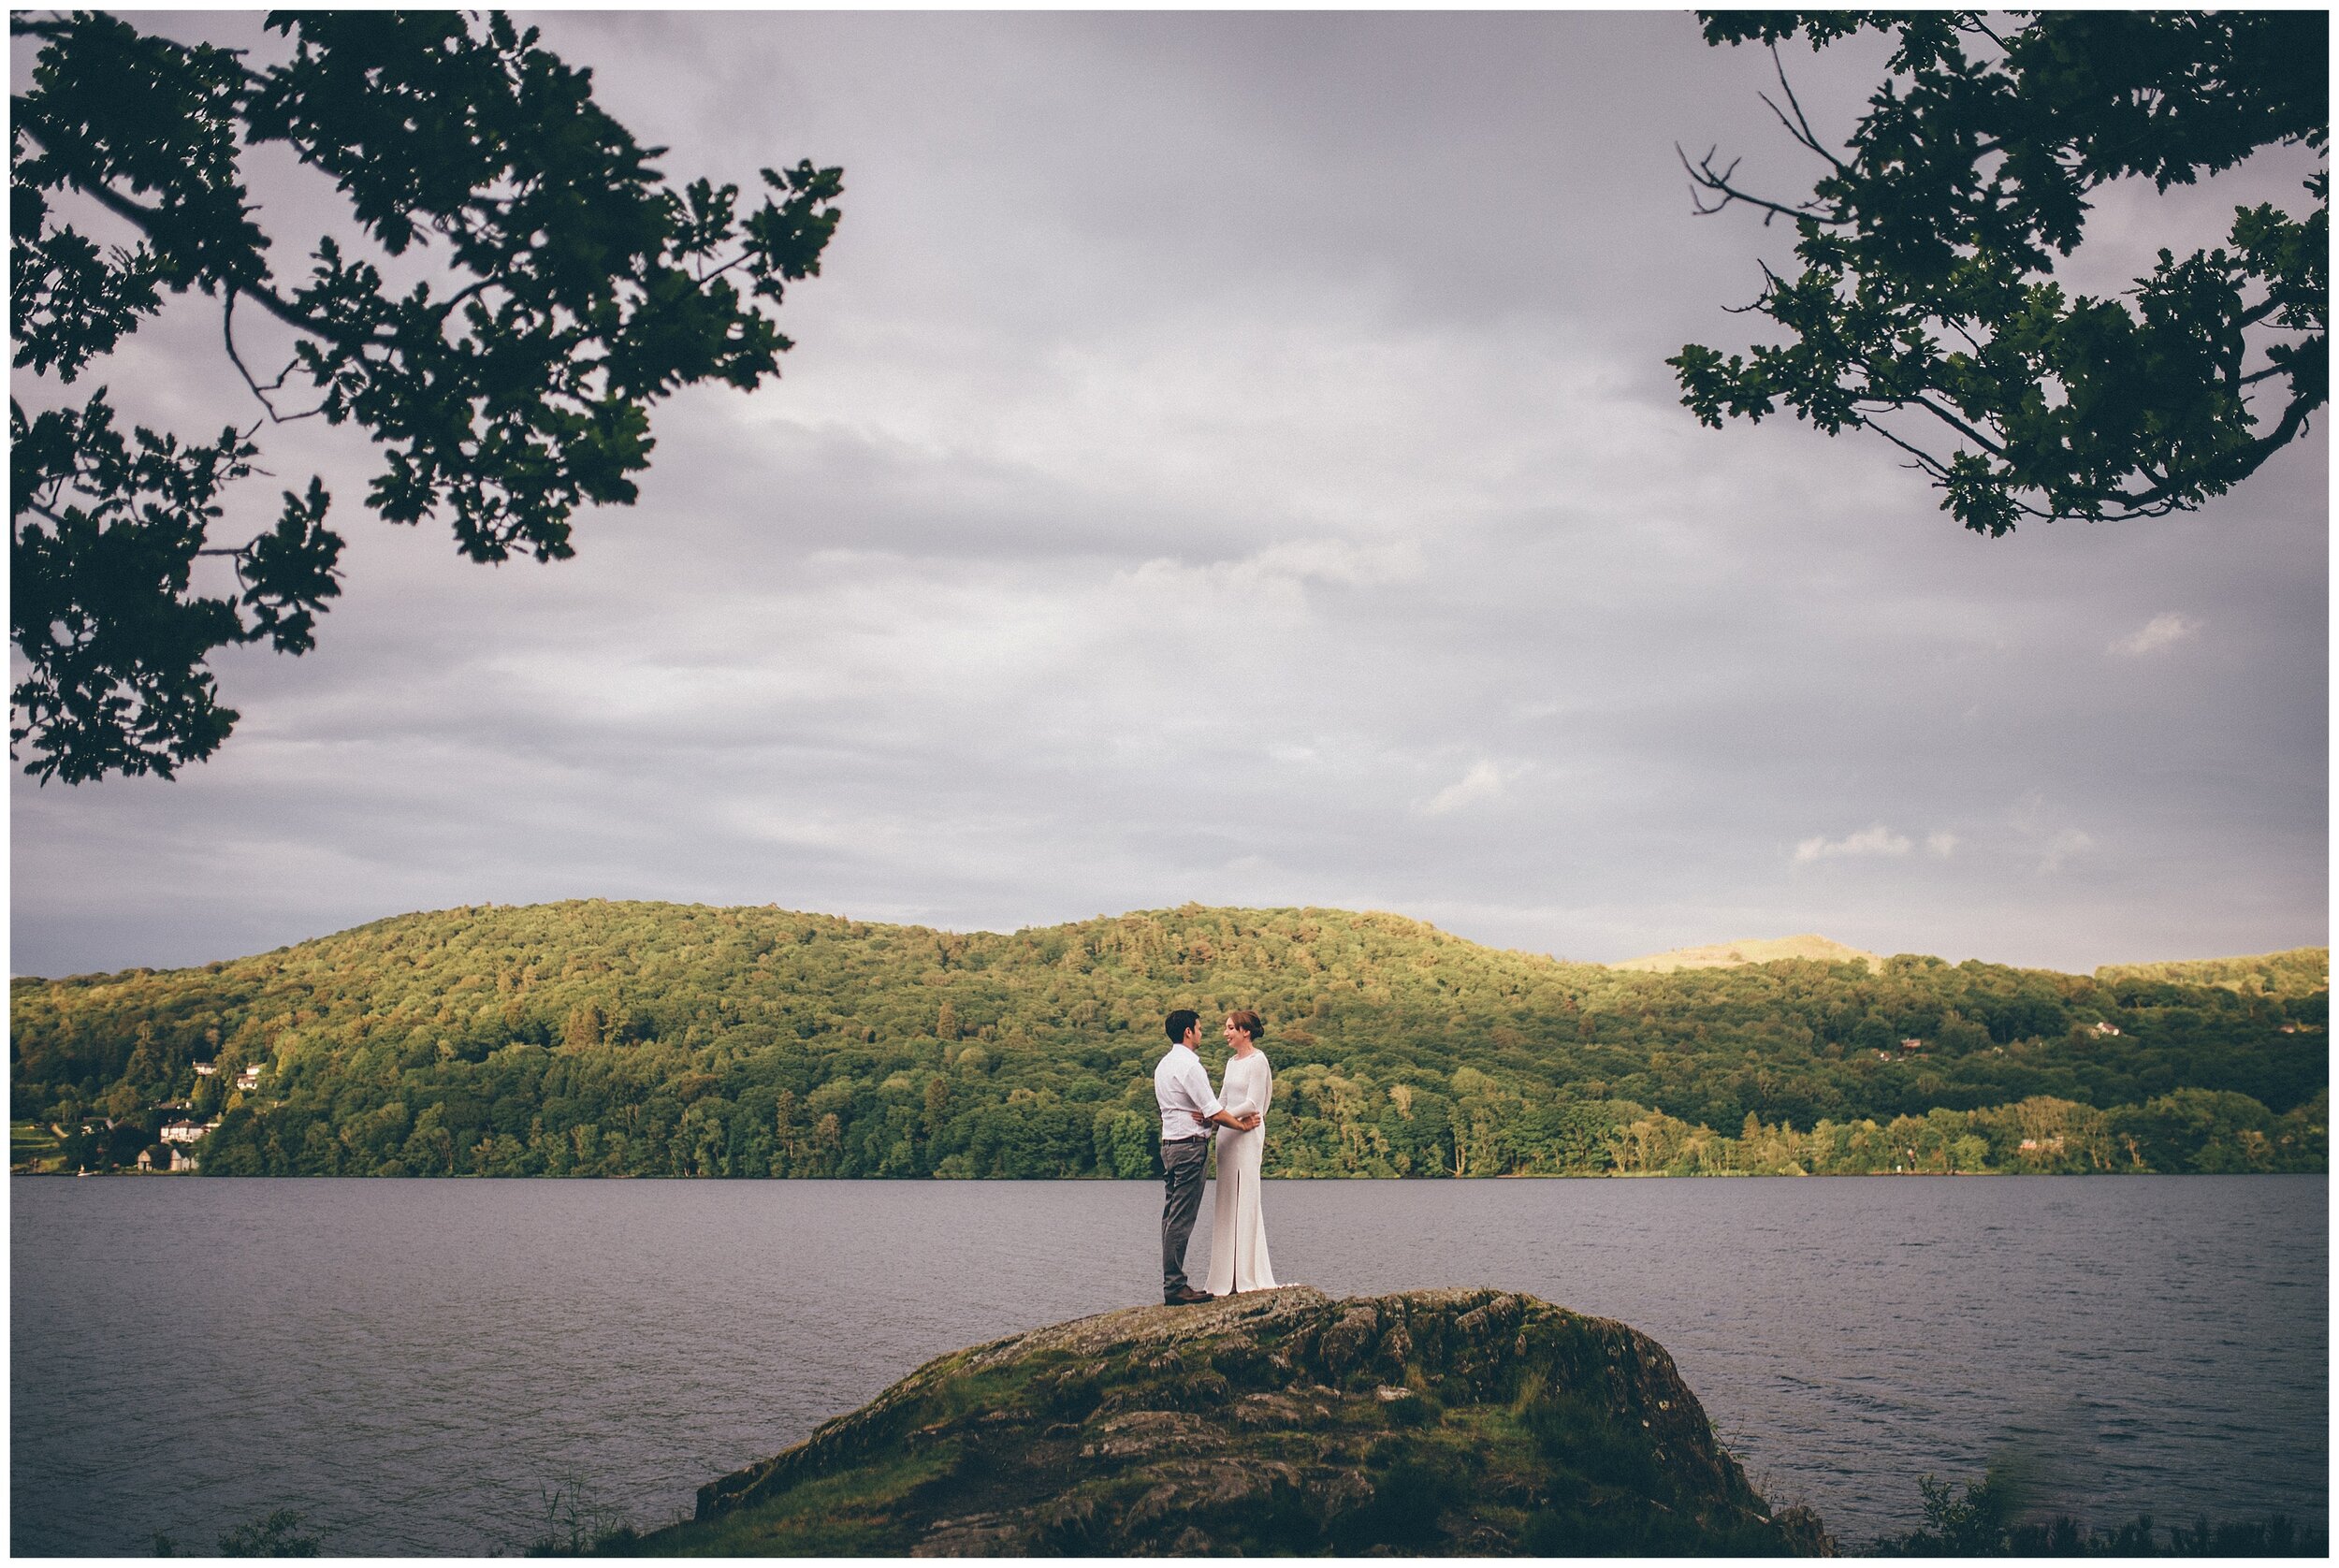 Wedding photography at Grubbins Point in the Lake District.